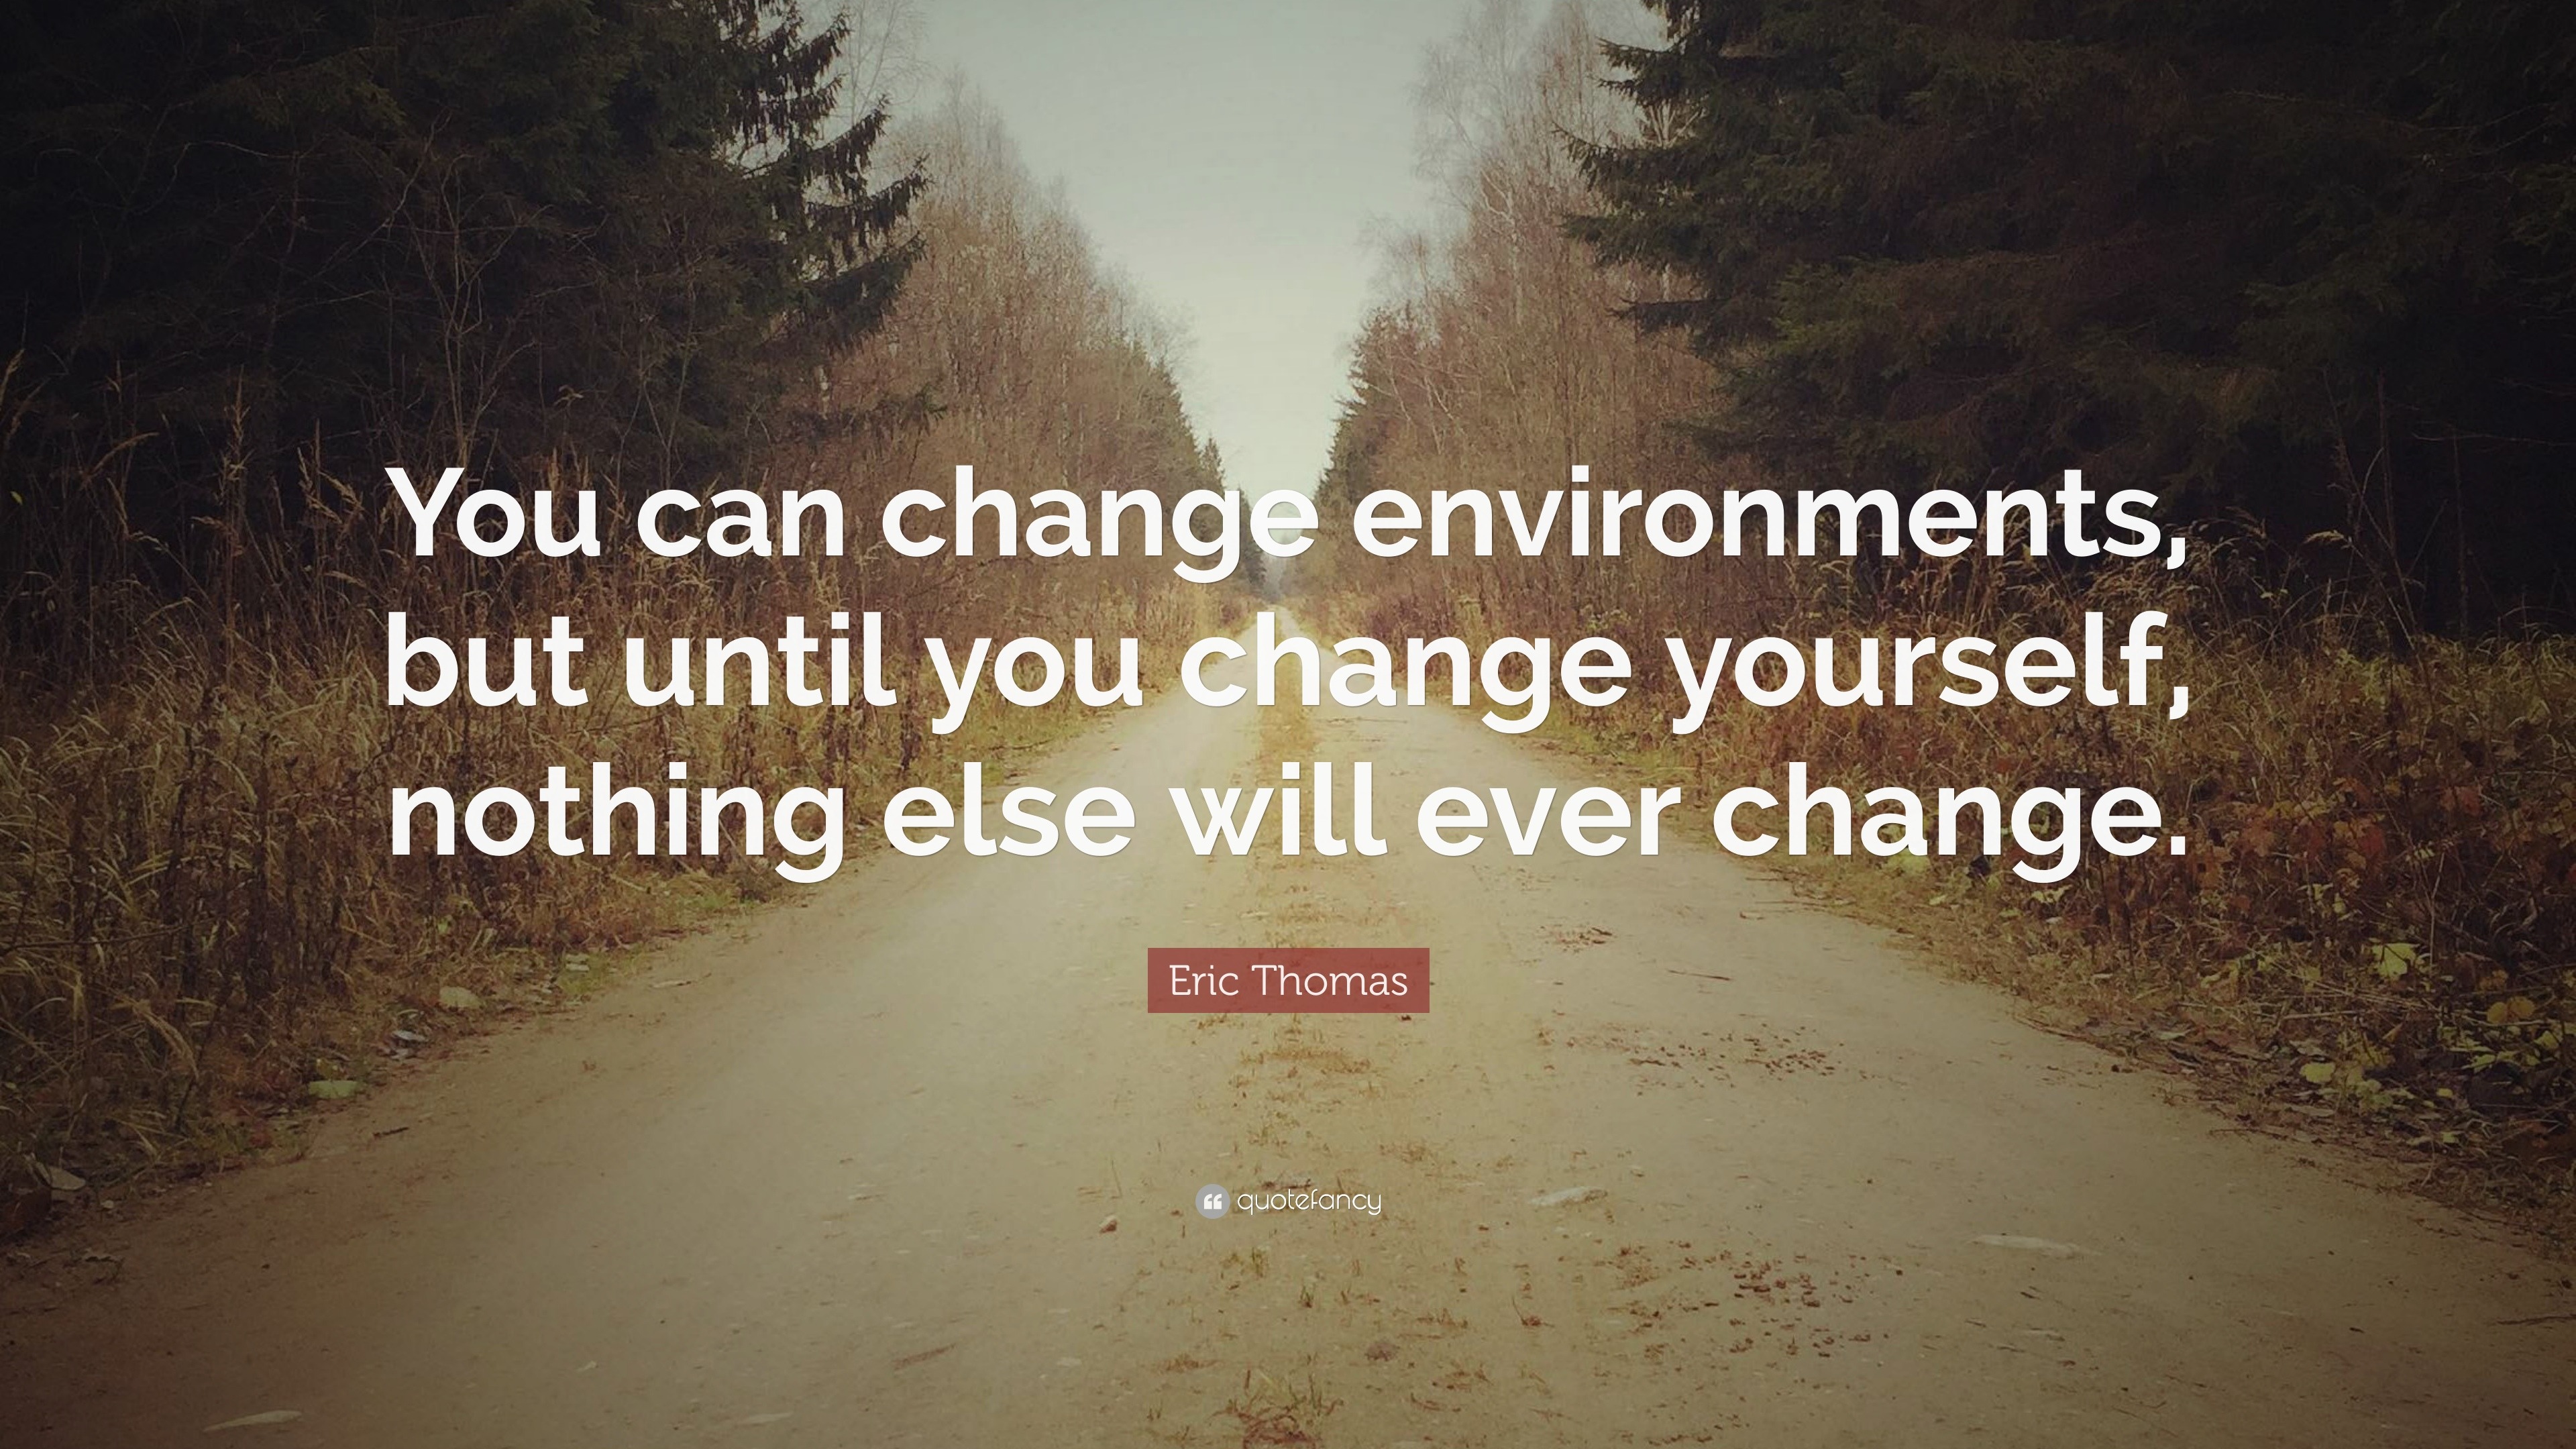 Eric Thomas Quote: “You can change environments, but until you change